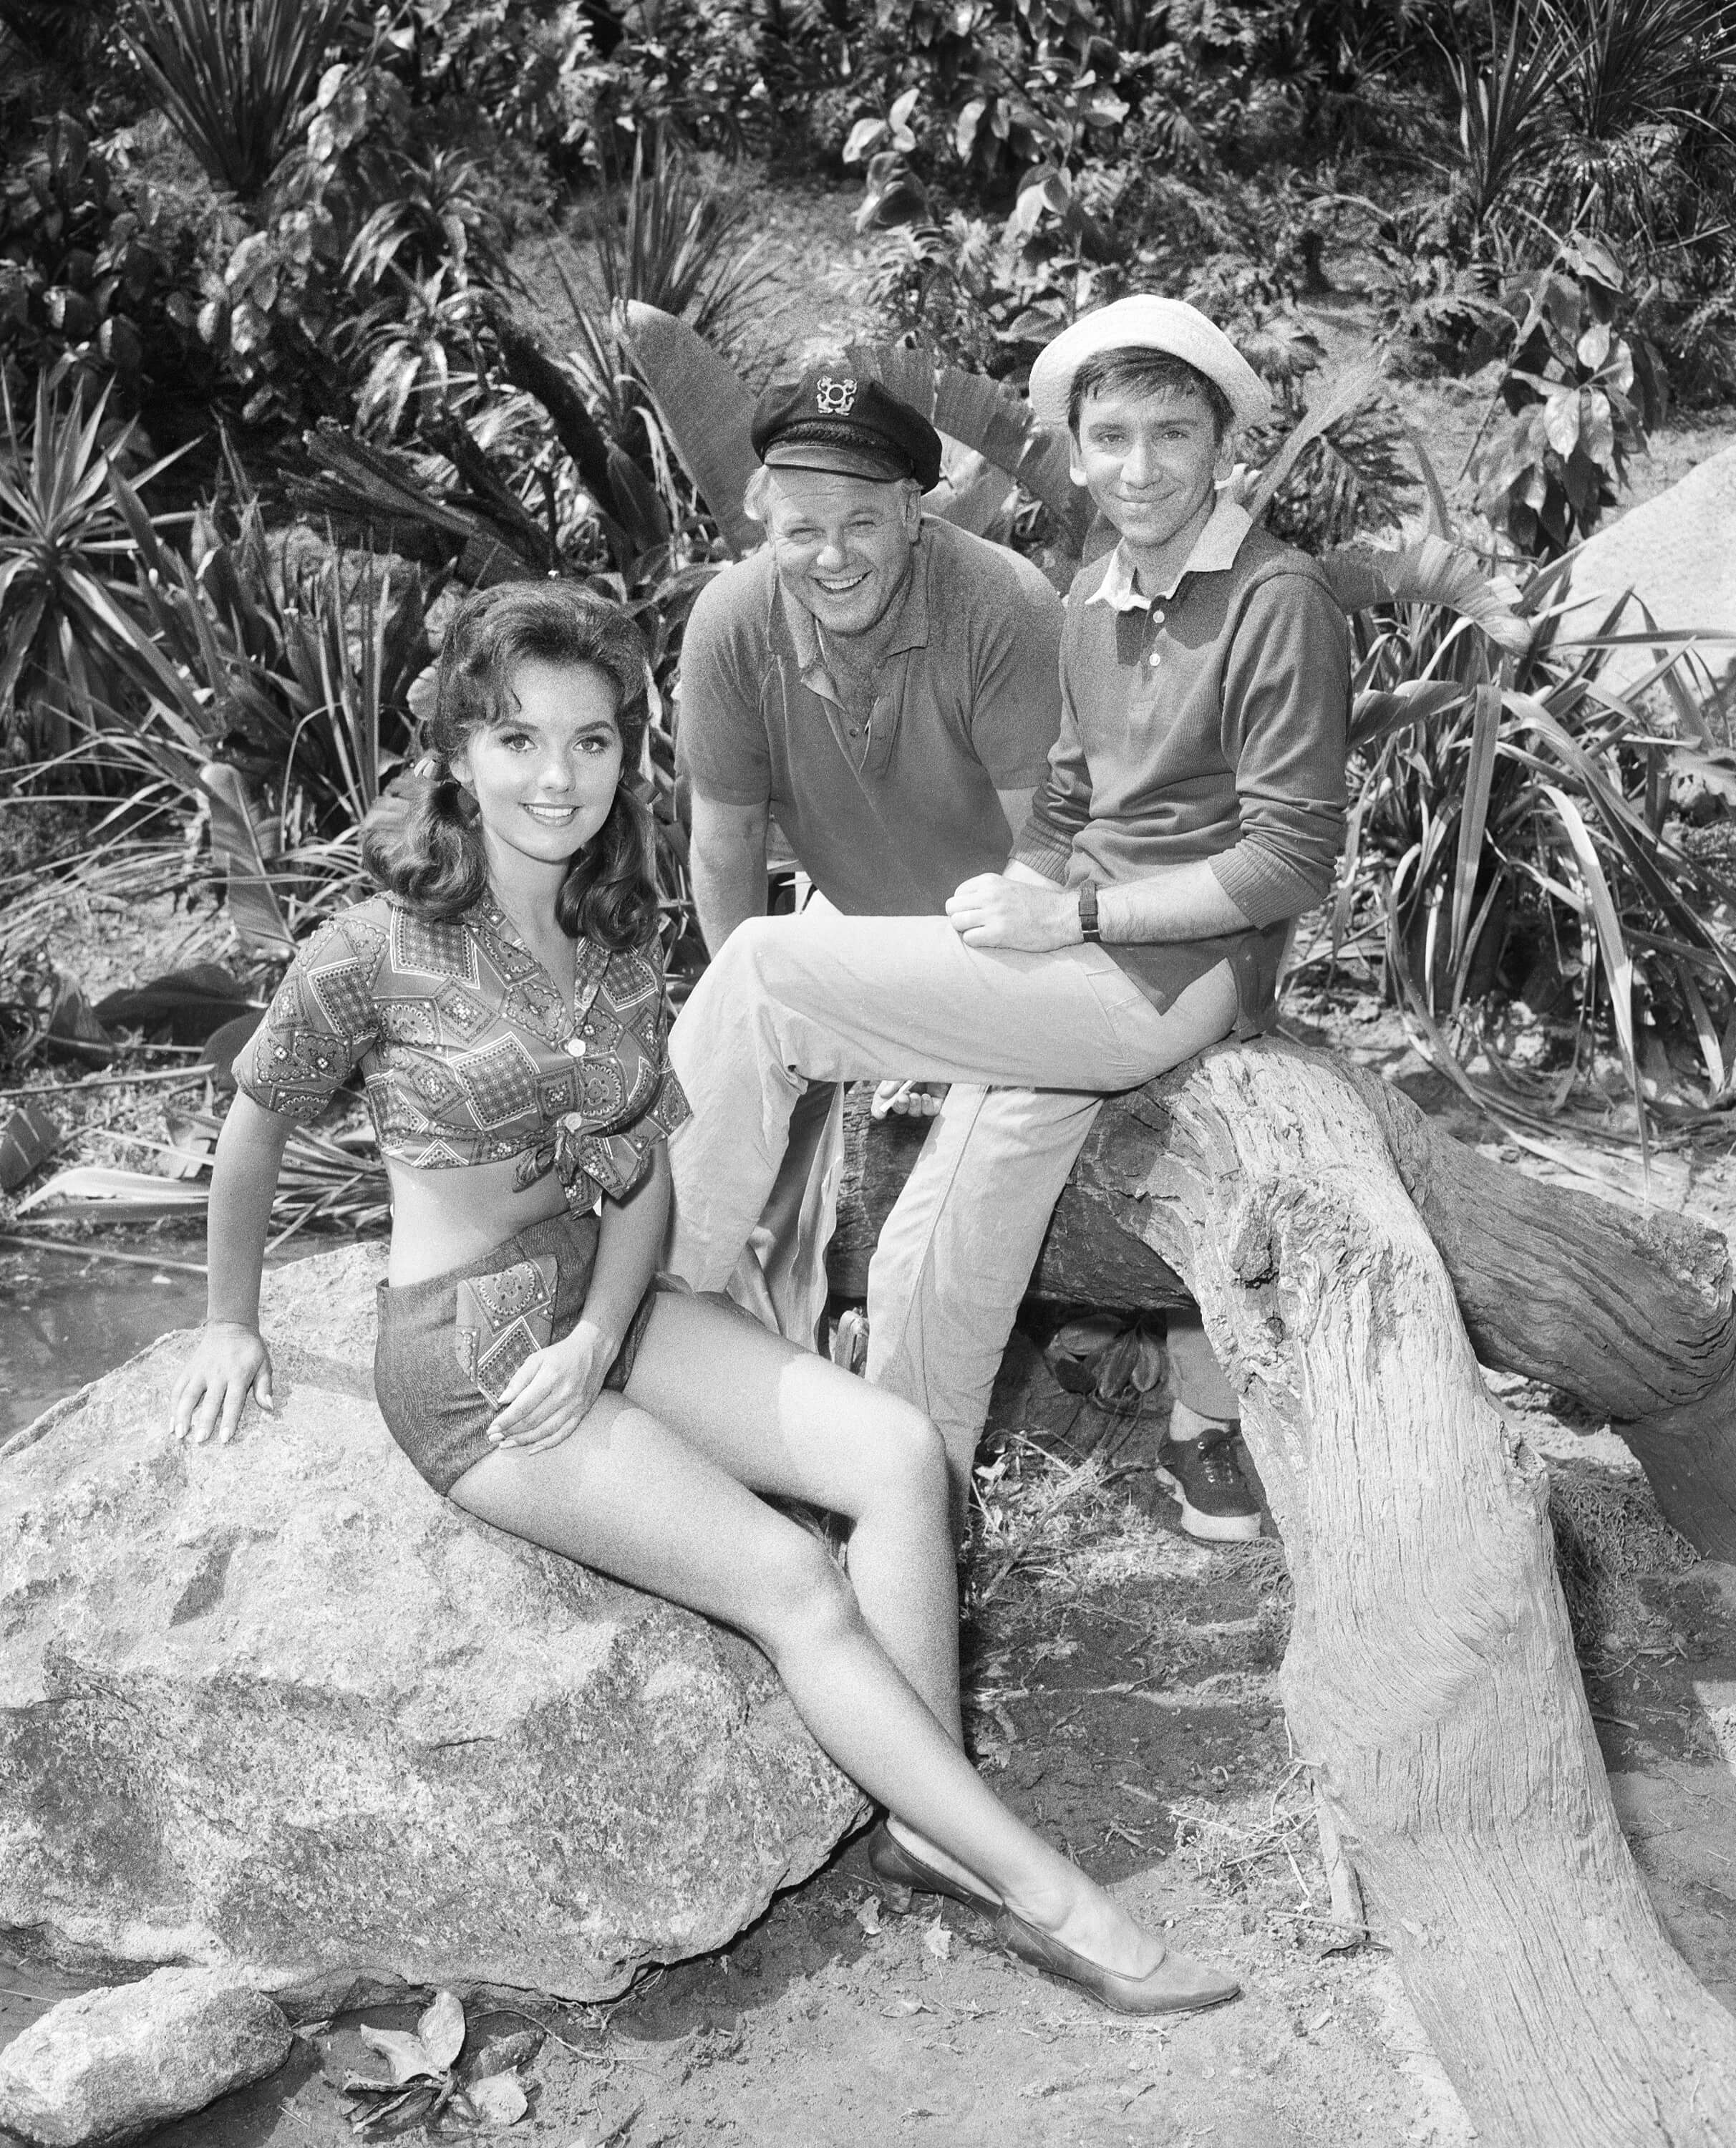 'Gilligan's Island' cast members Dawn Wells, Alan Hale Jr, and Bob Denver posing in a black and white photo for the show.